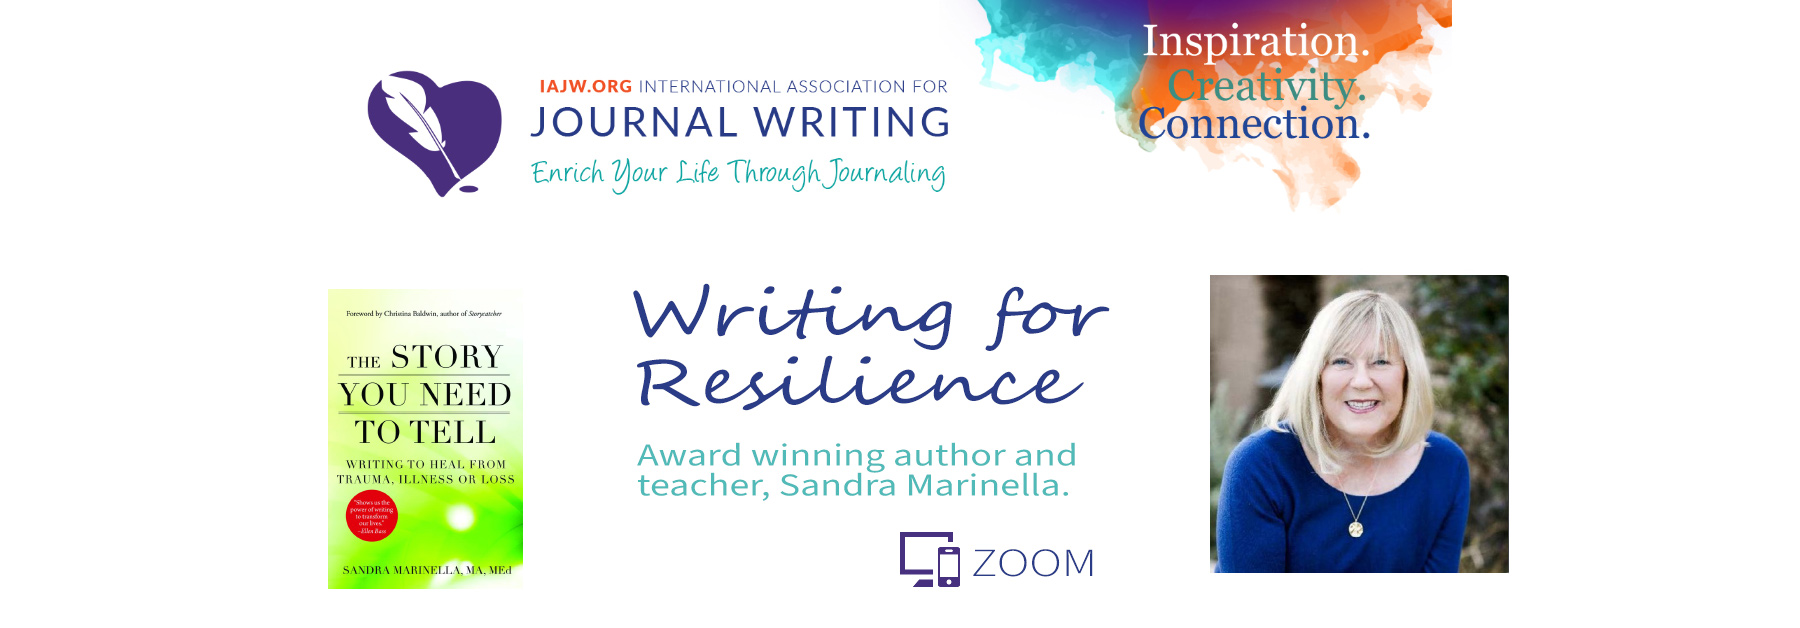 Story You Tell Workshop - Writing for Resilience Sponsored by IAWJ